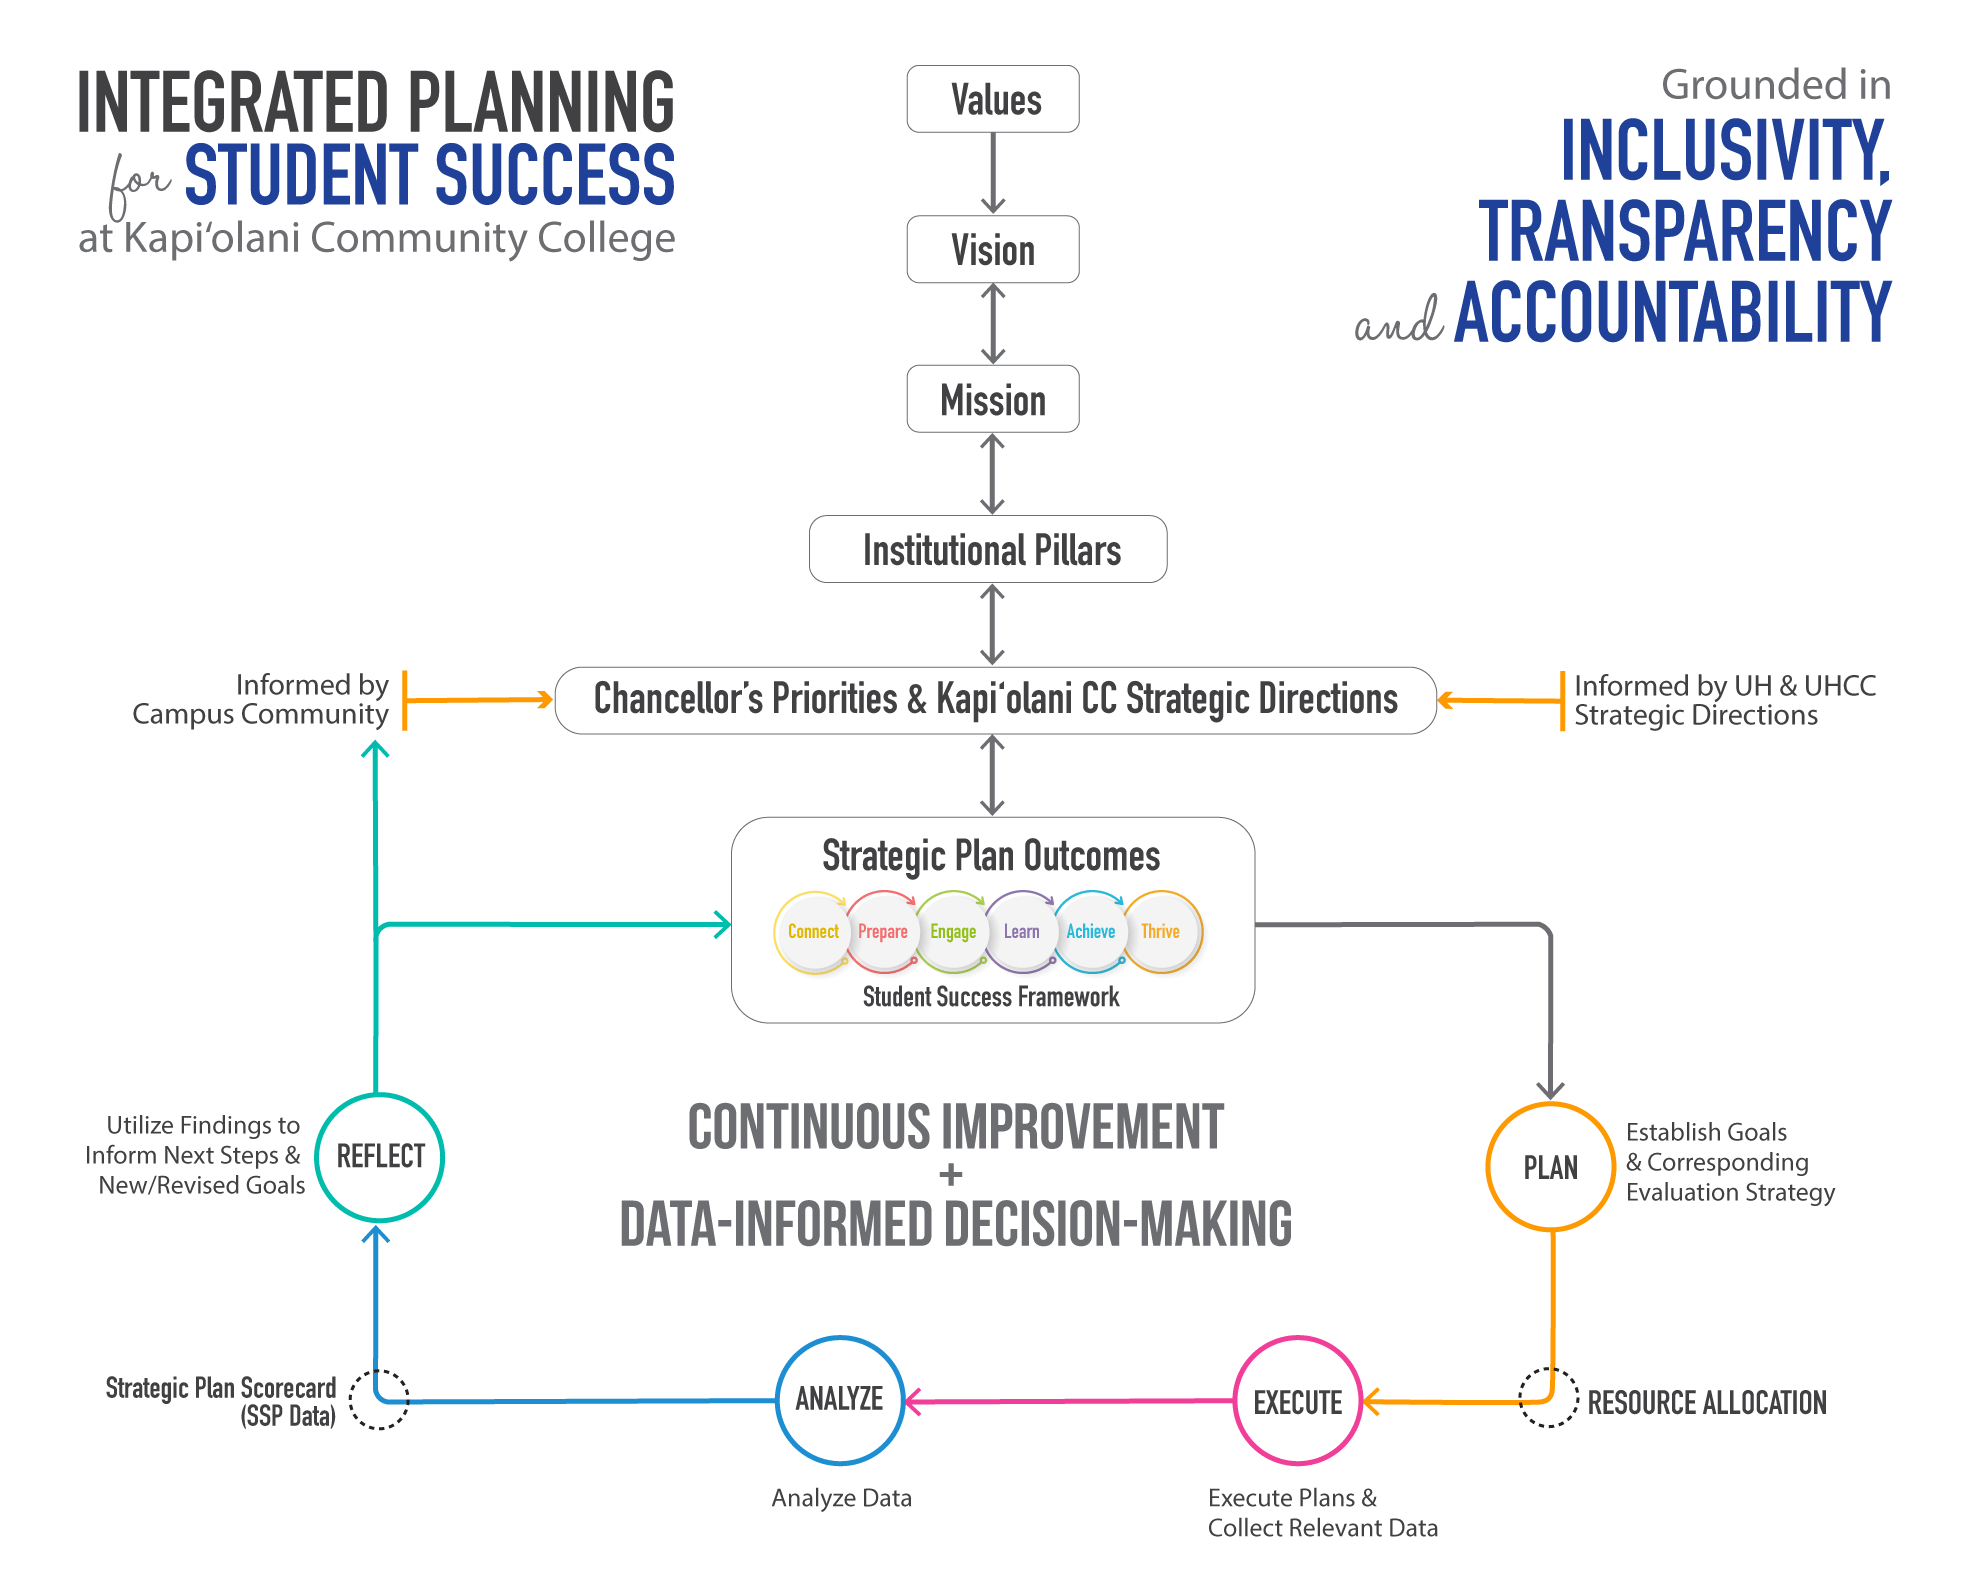 Integrated Planning for Student Success model